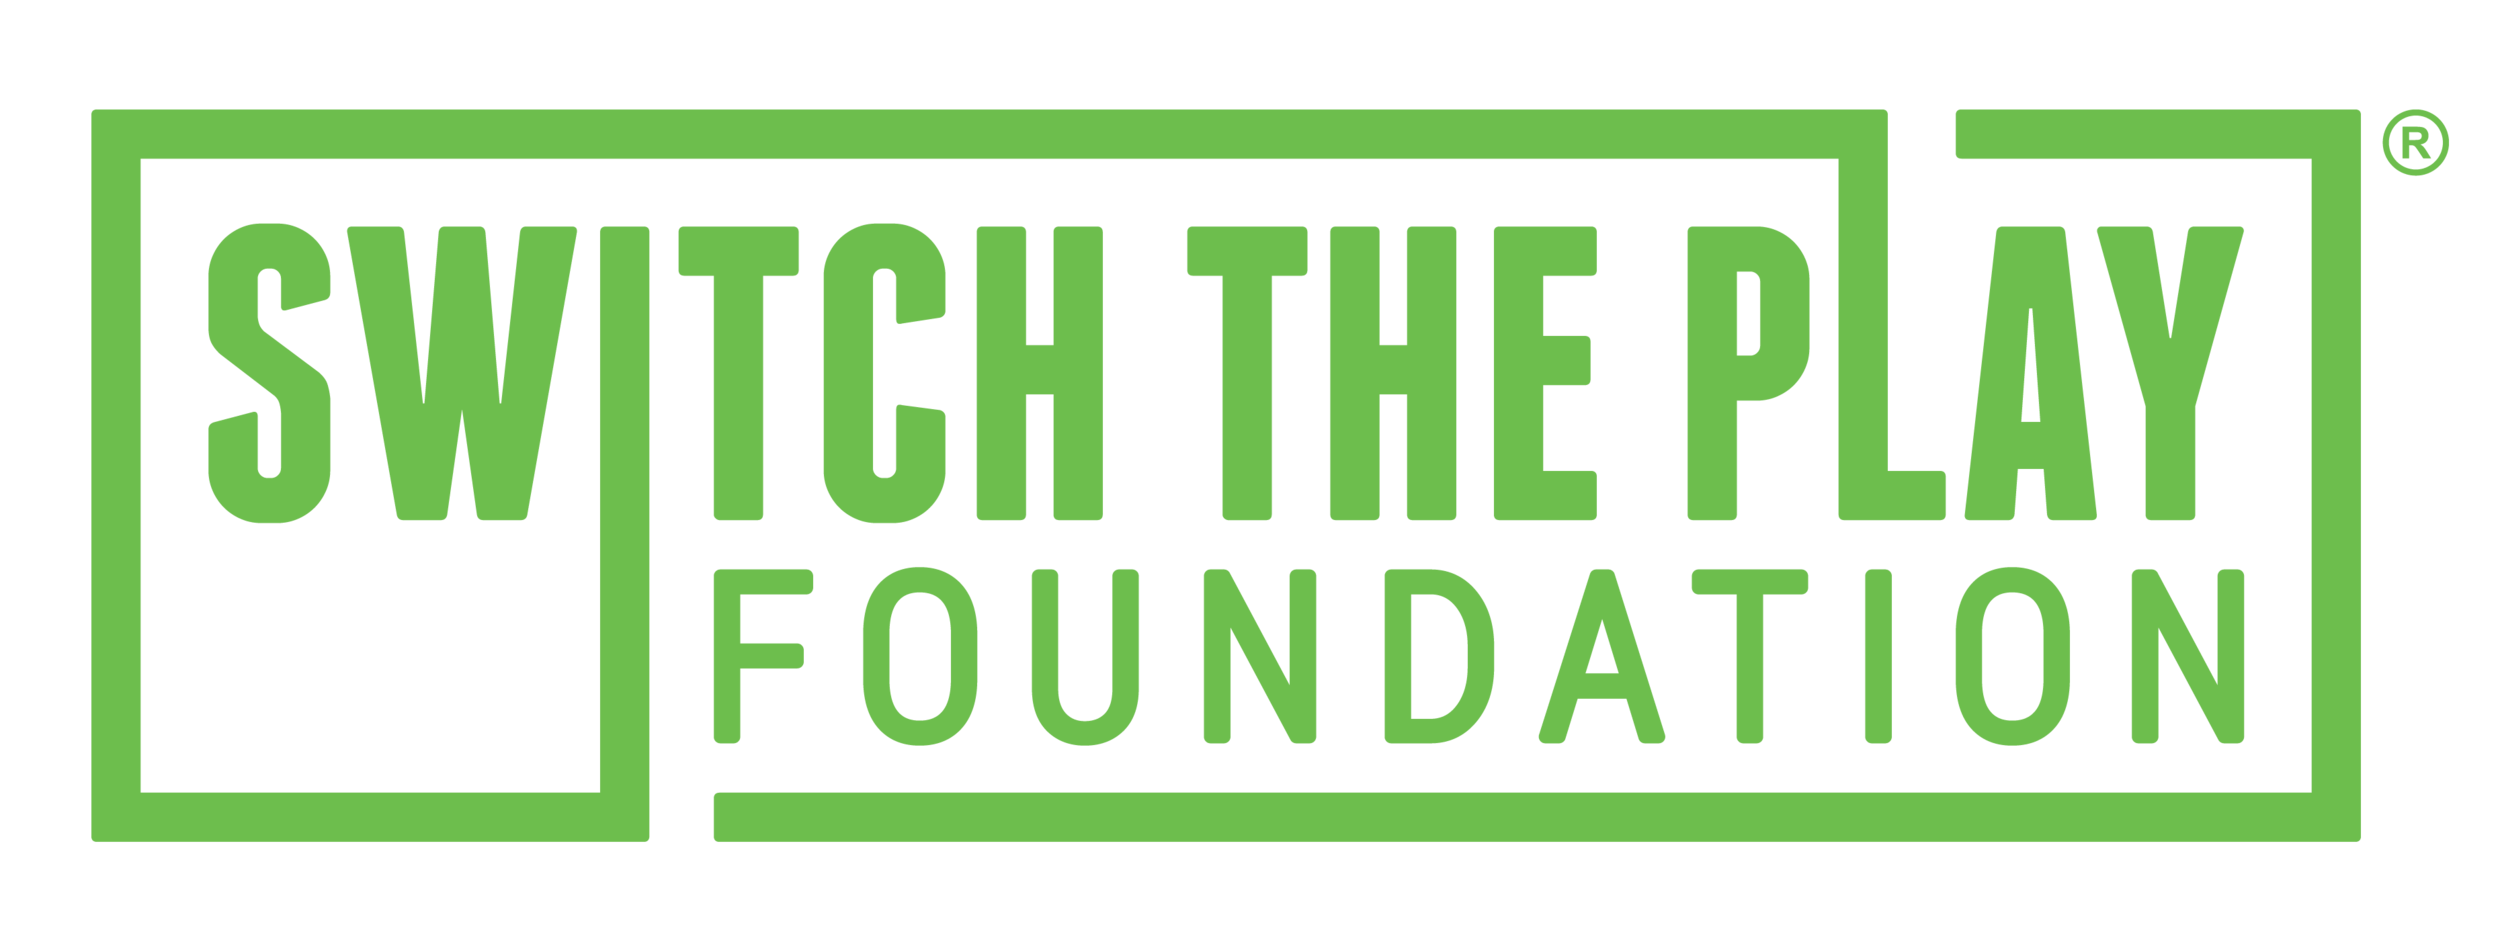 Switch The Play Foundation Green logo.png